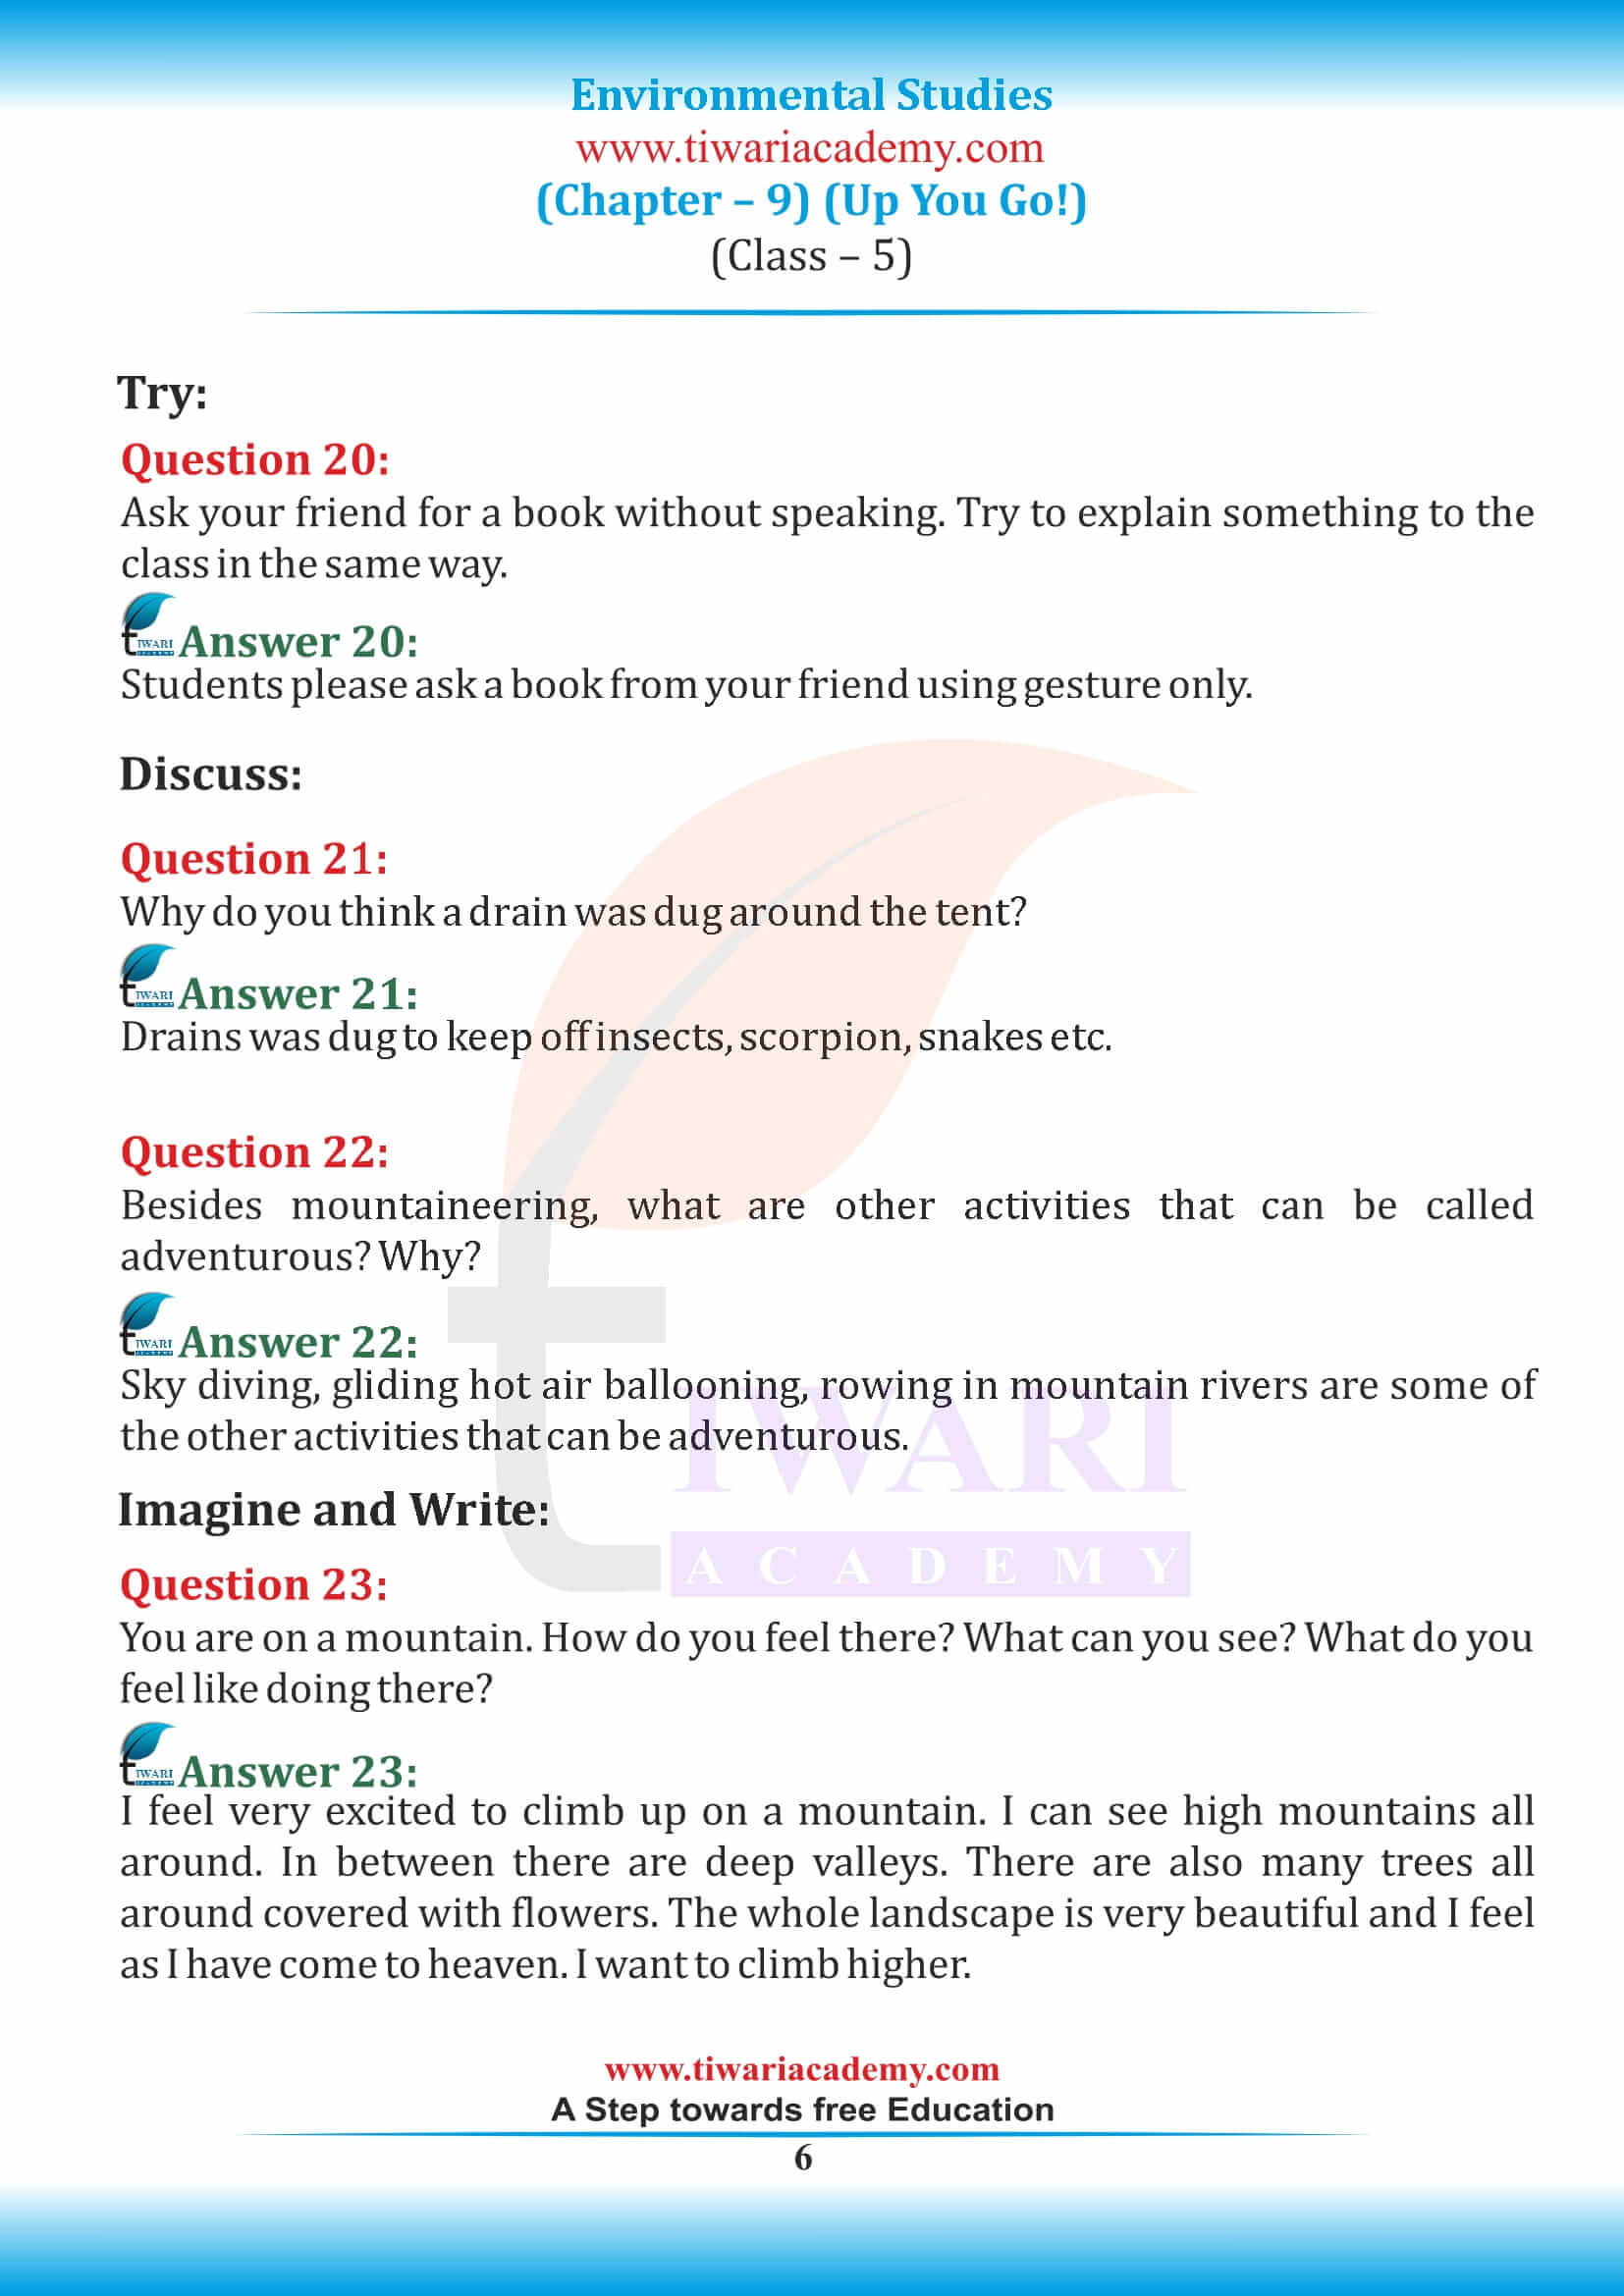 NCERT Solutions for Class 5 EVS Chapter 9 all answers